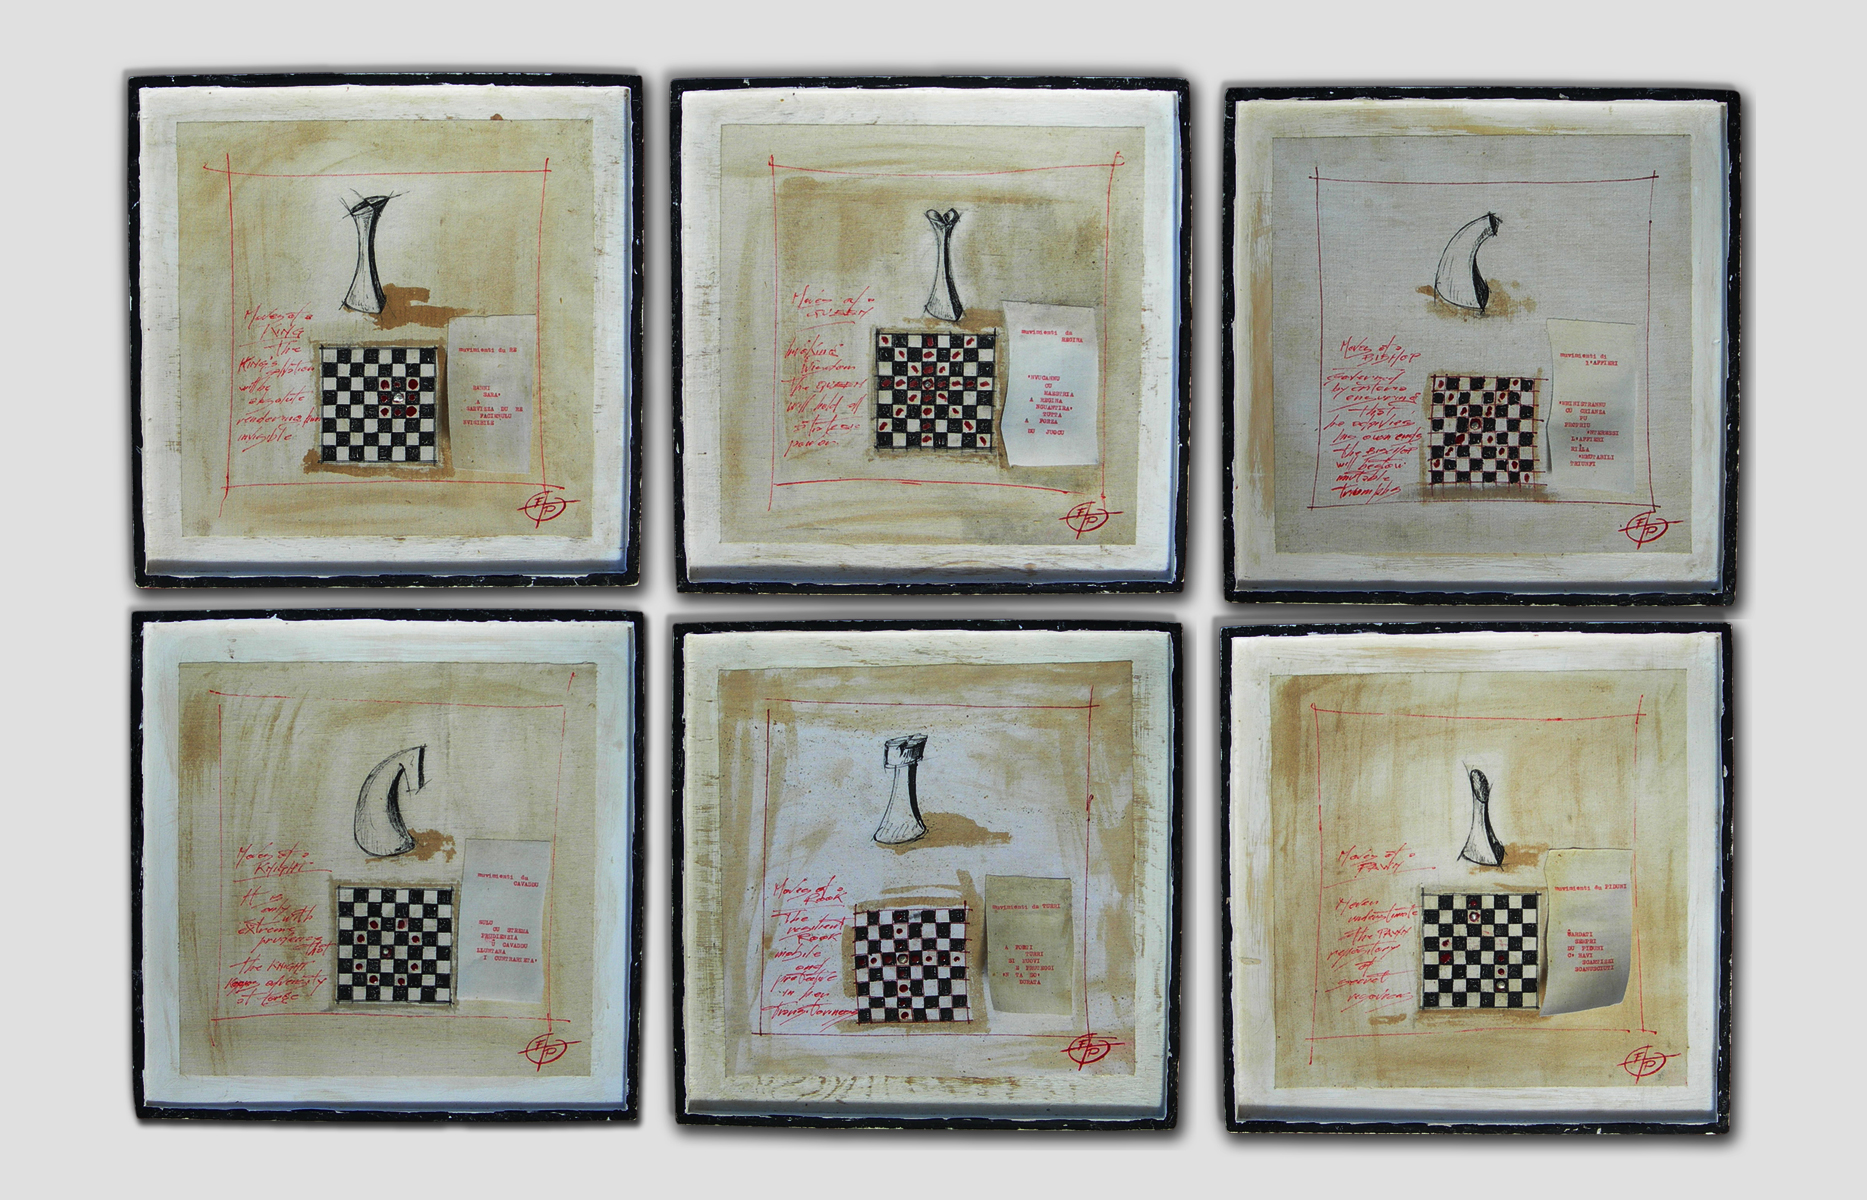 009-PRO-JECTUS (the game of chess/ù juocu di scacchi) - 2012  
37 x 37 cm ( each )
mixed media on canvas panel